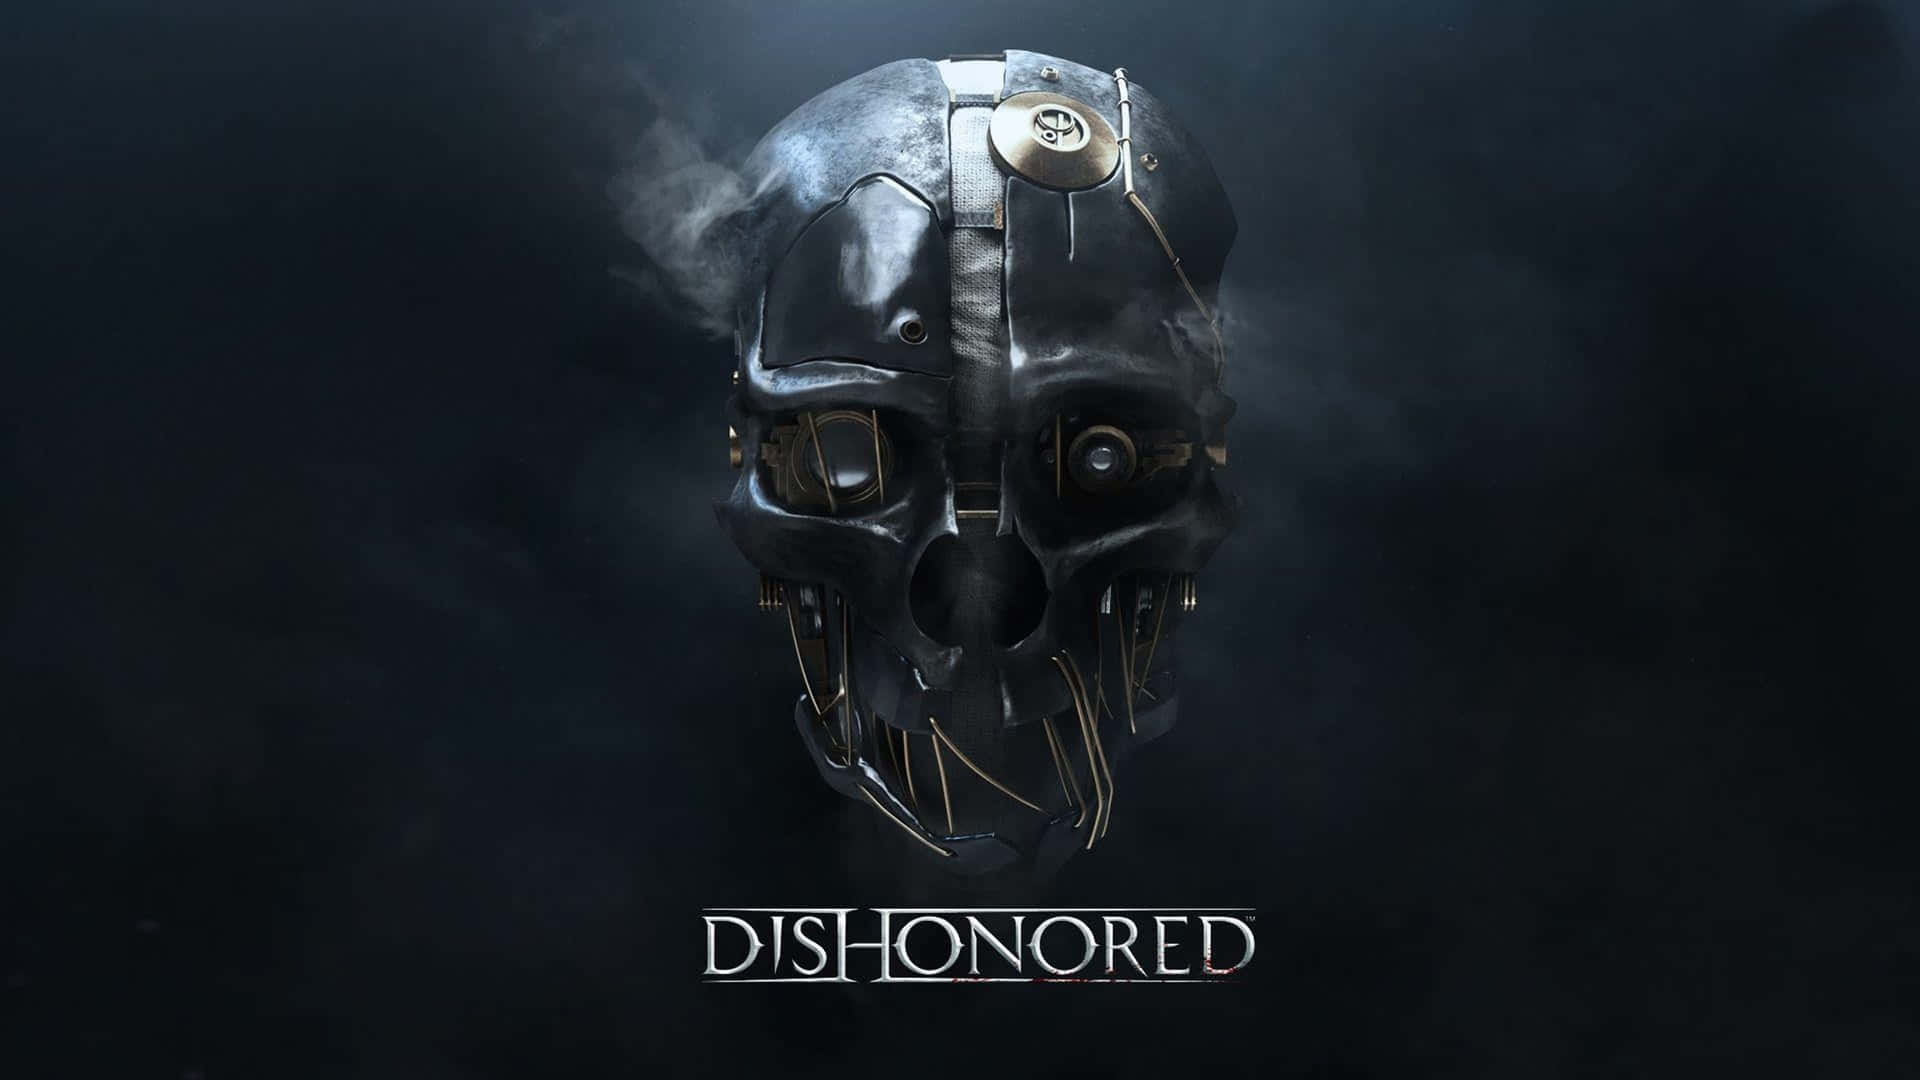 Download 4k Dishonored Wallpaper 